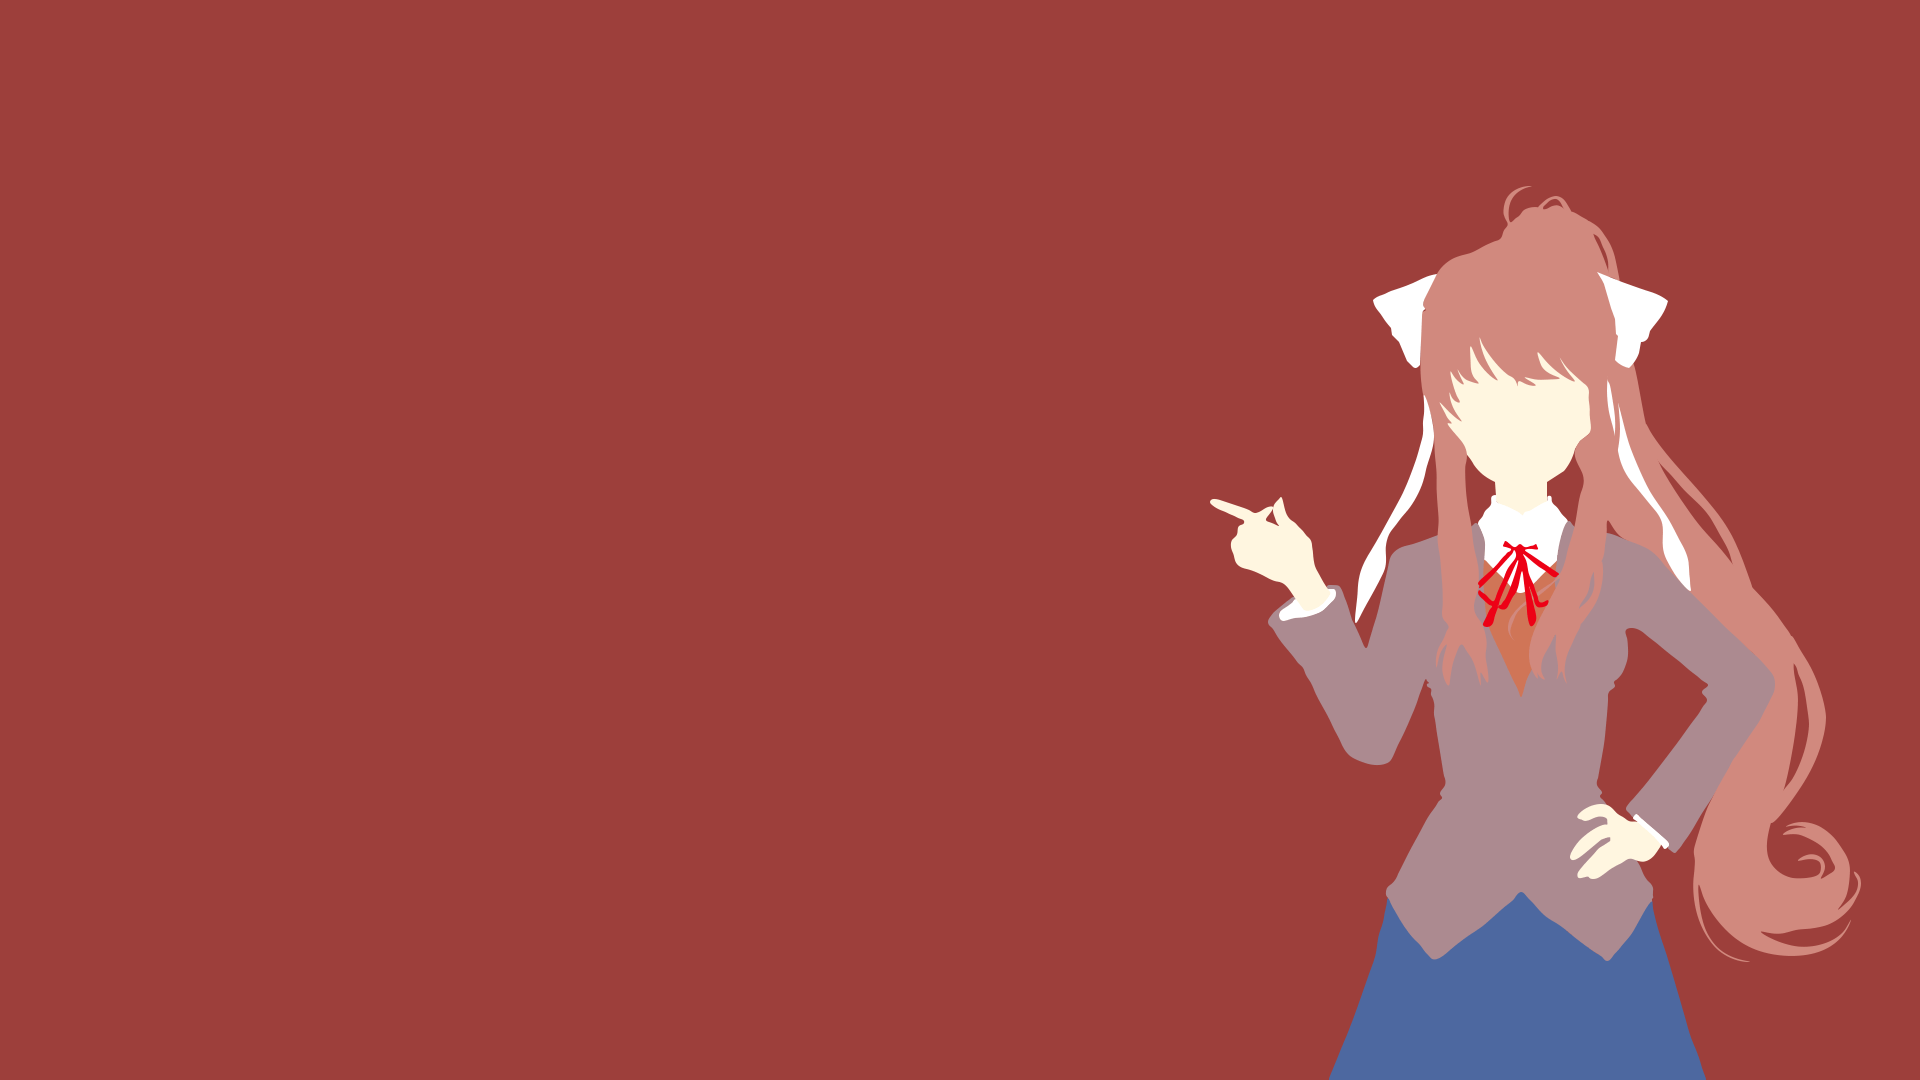 Made a full set of Minimal Wallpaper, included some alternate